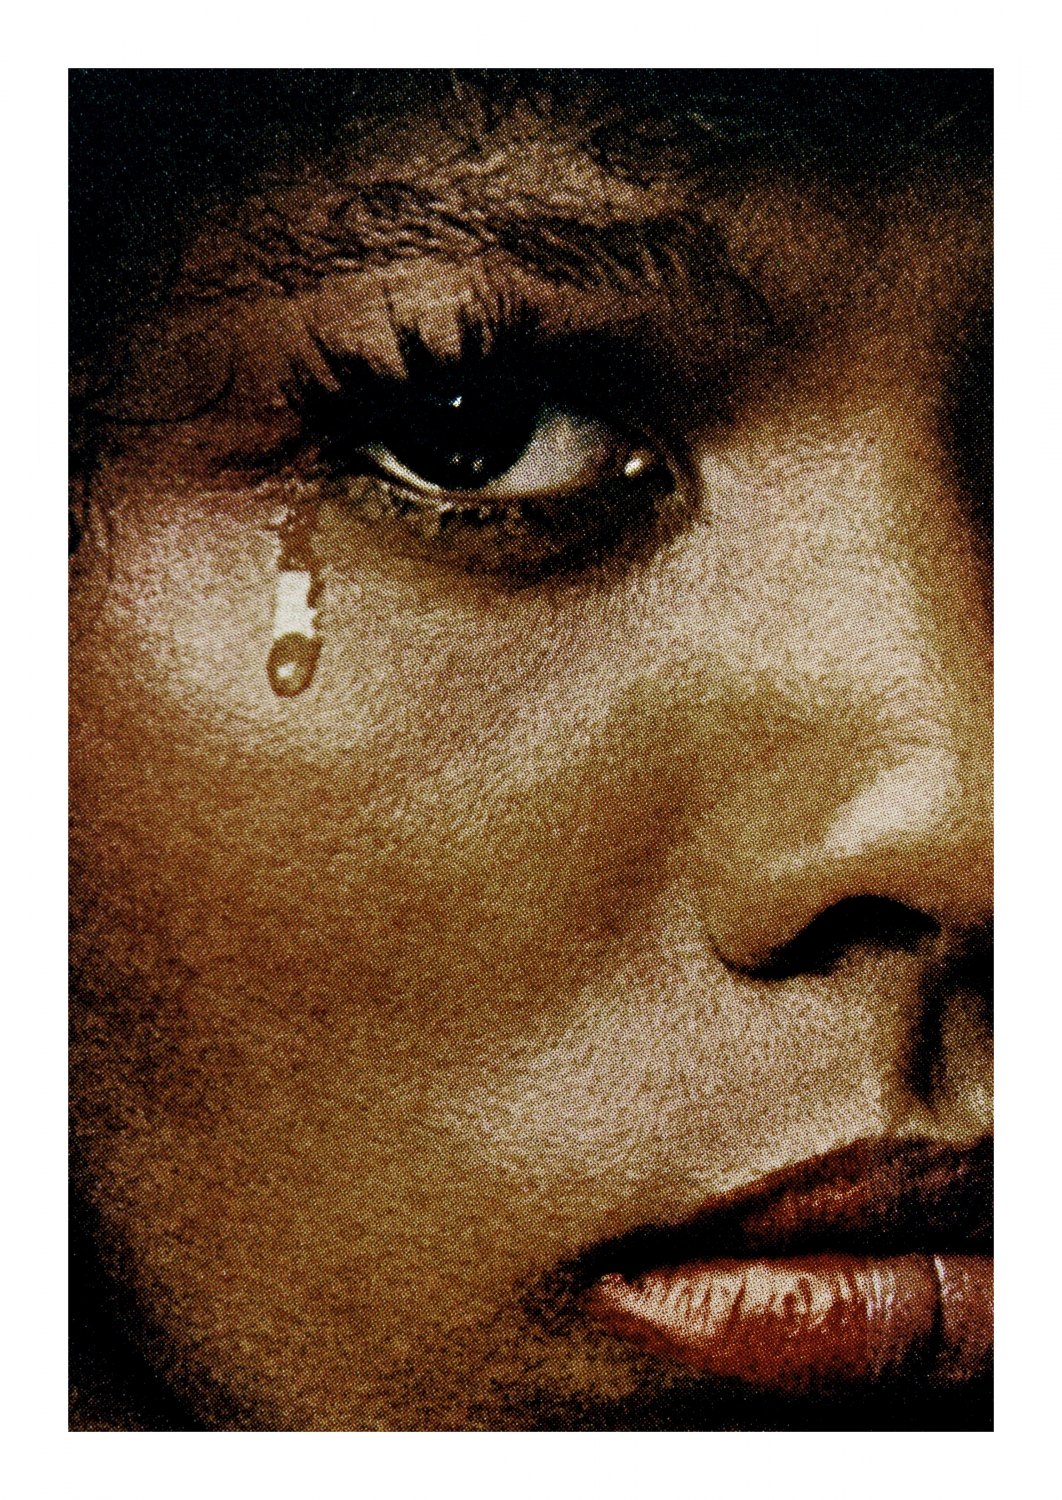 Anne Collier Woman Crying #16, 2018 C-print, 137 x 96 cm